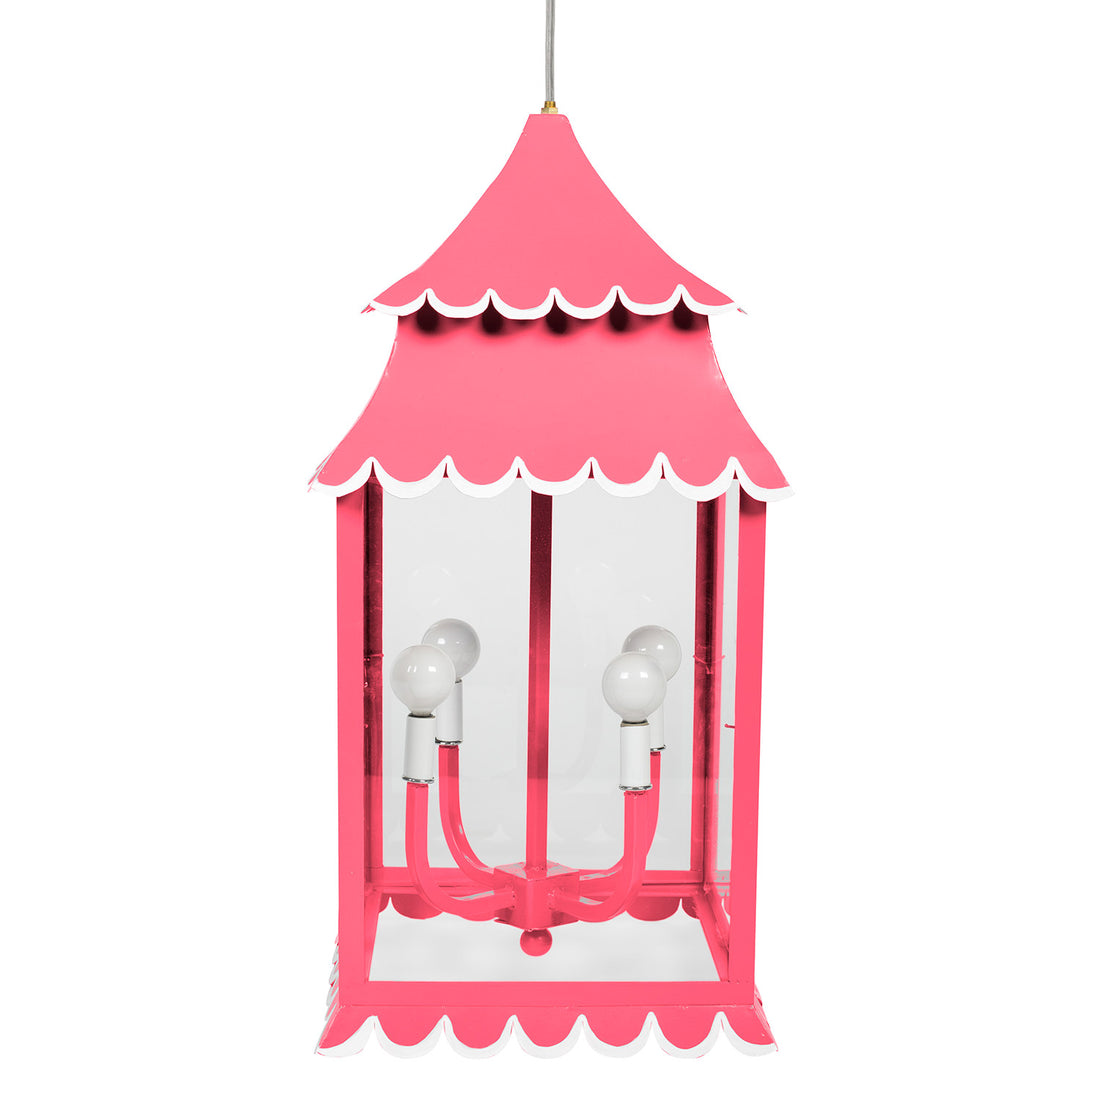 Pink Girly lantern with scallops made from iron and glass